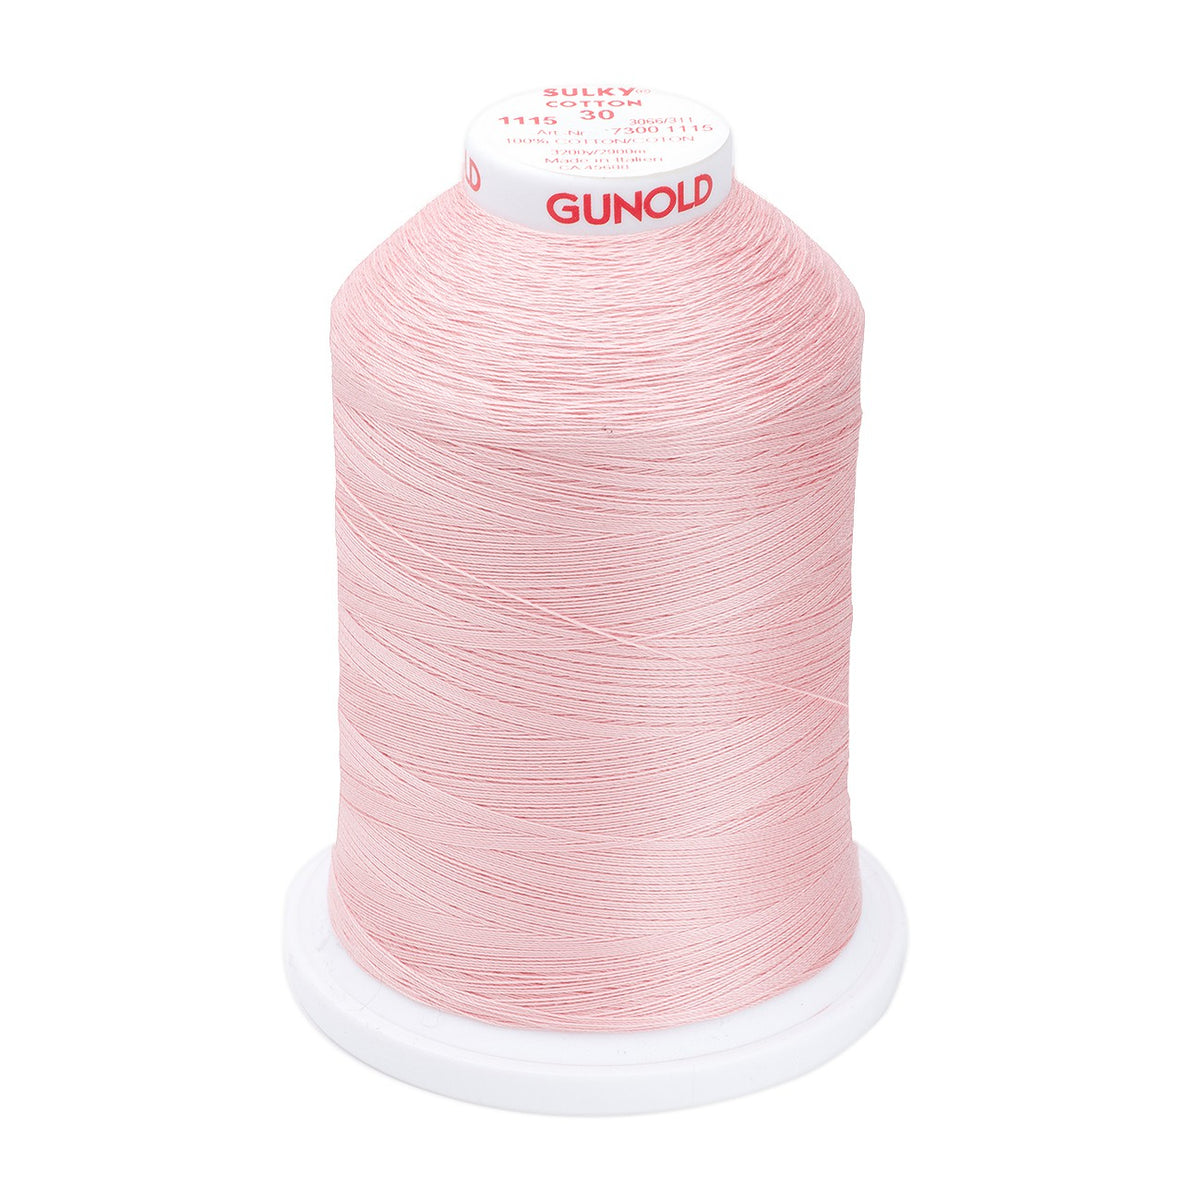 Sulky Cotton 30wt Thread 1115 Light Pink  3200yd Cone